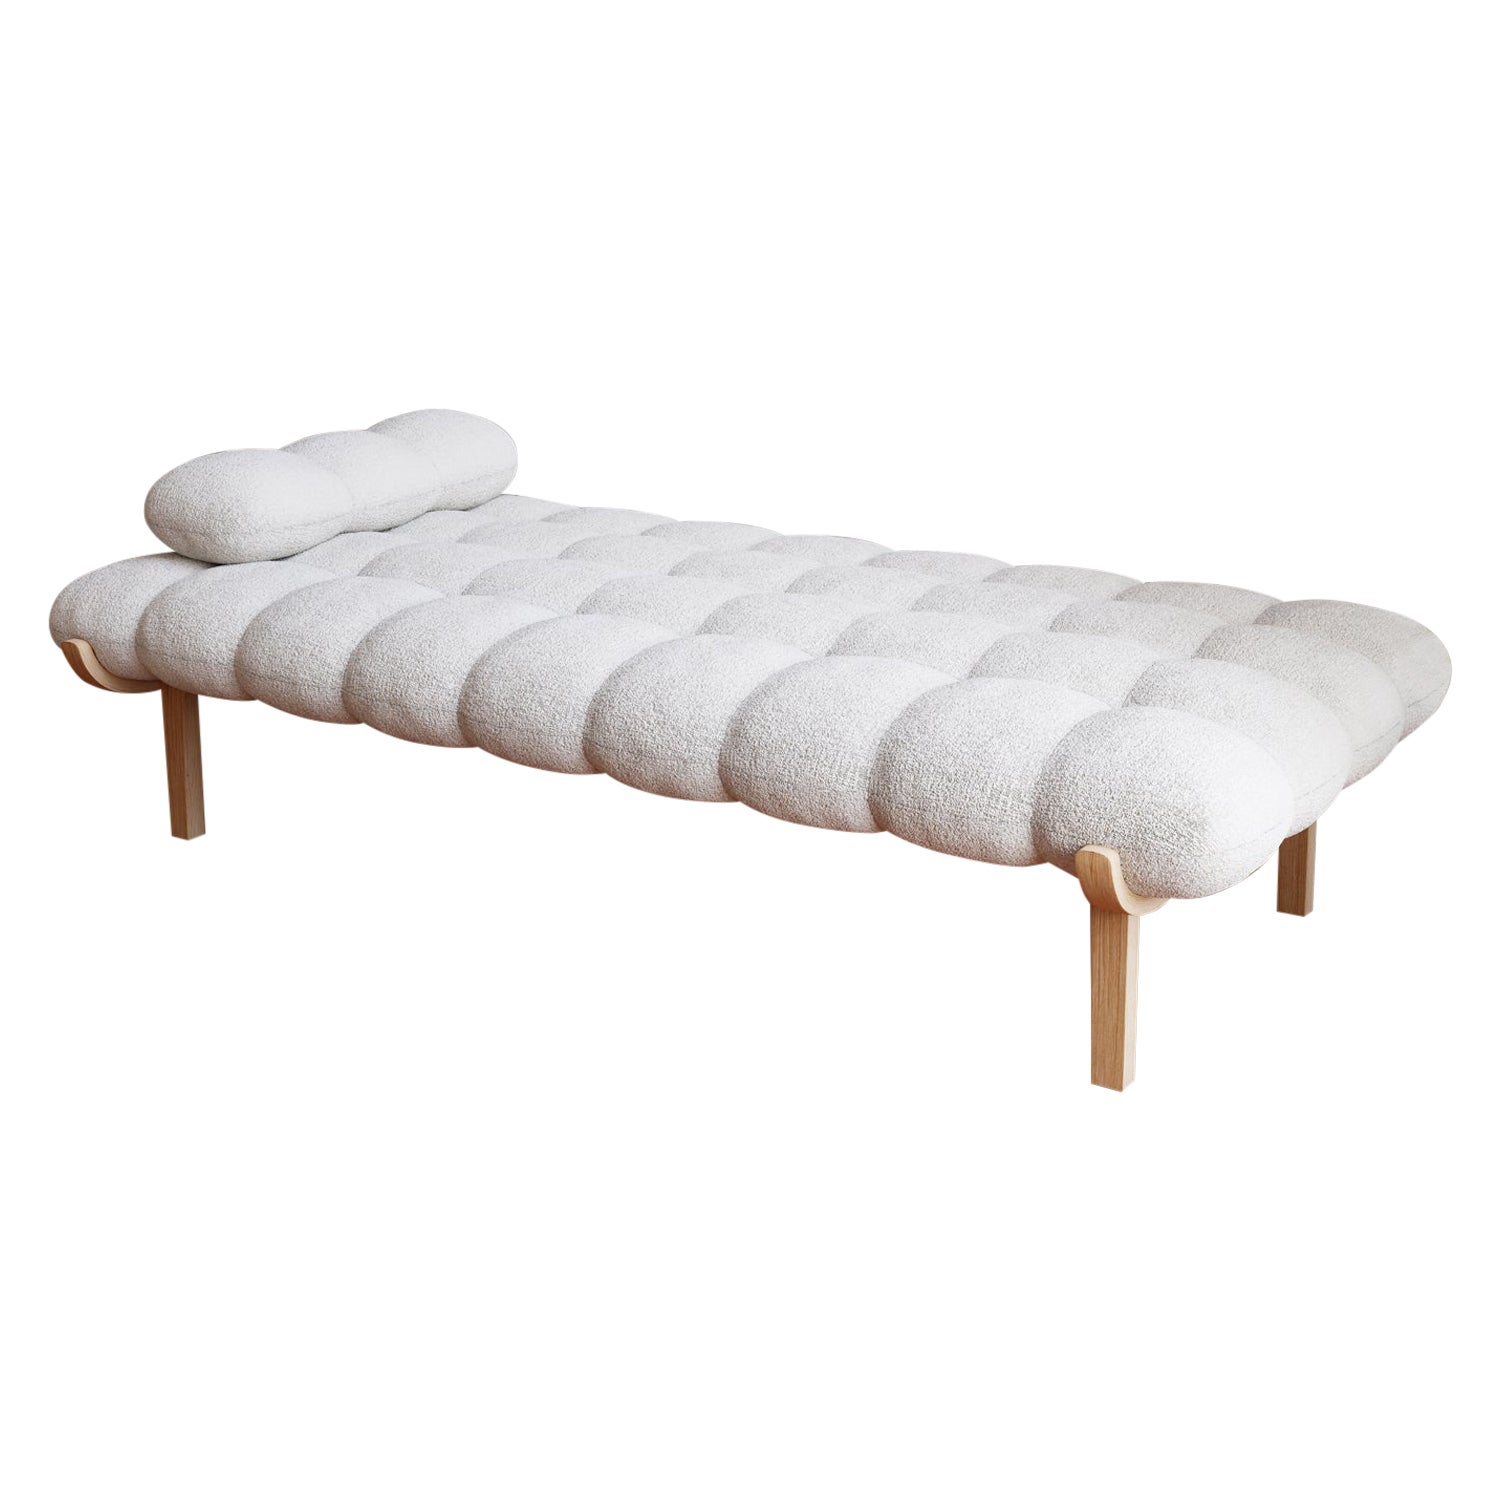 Cloudy Daybed For Sale